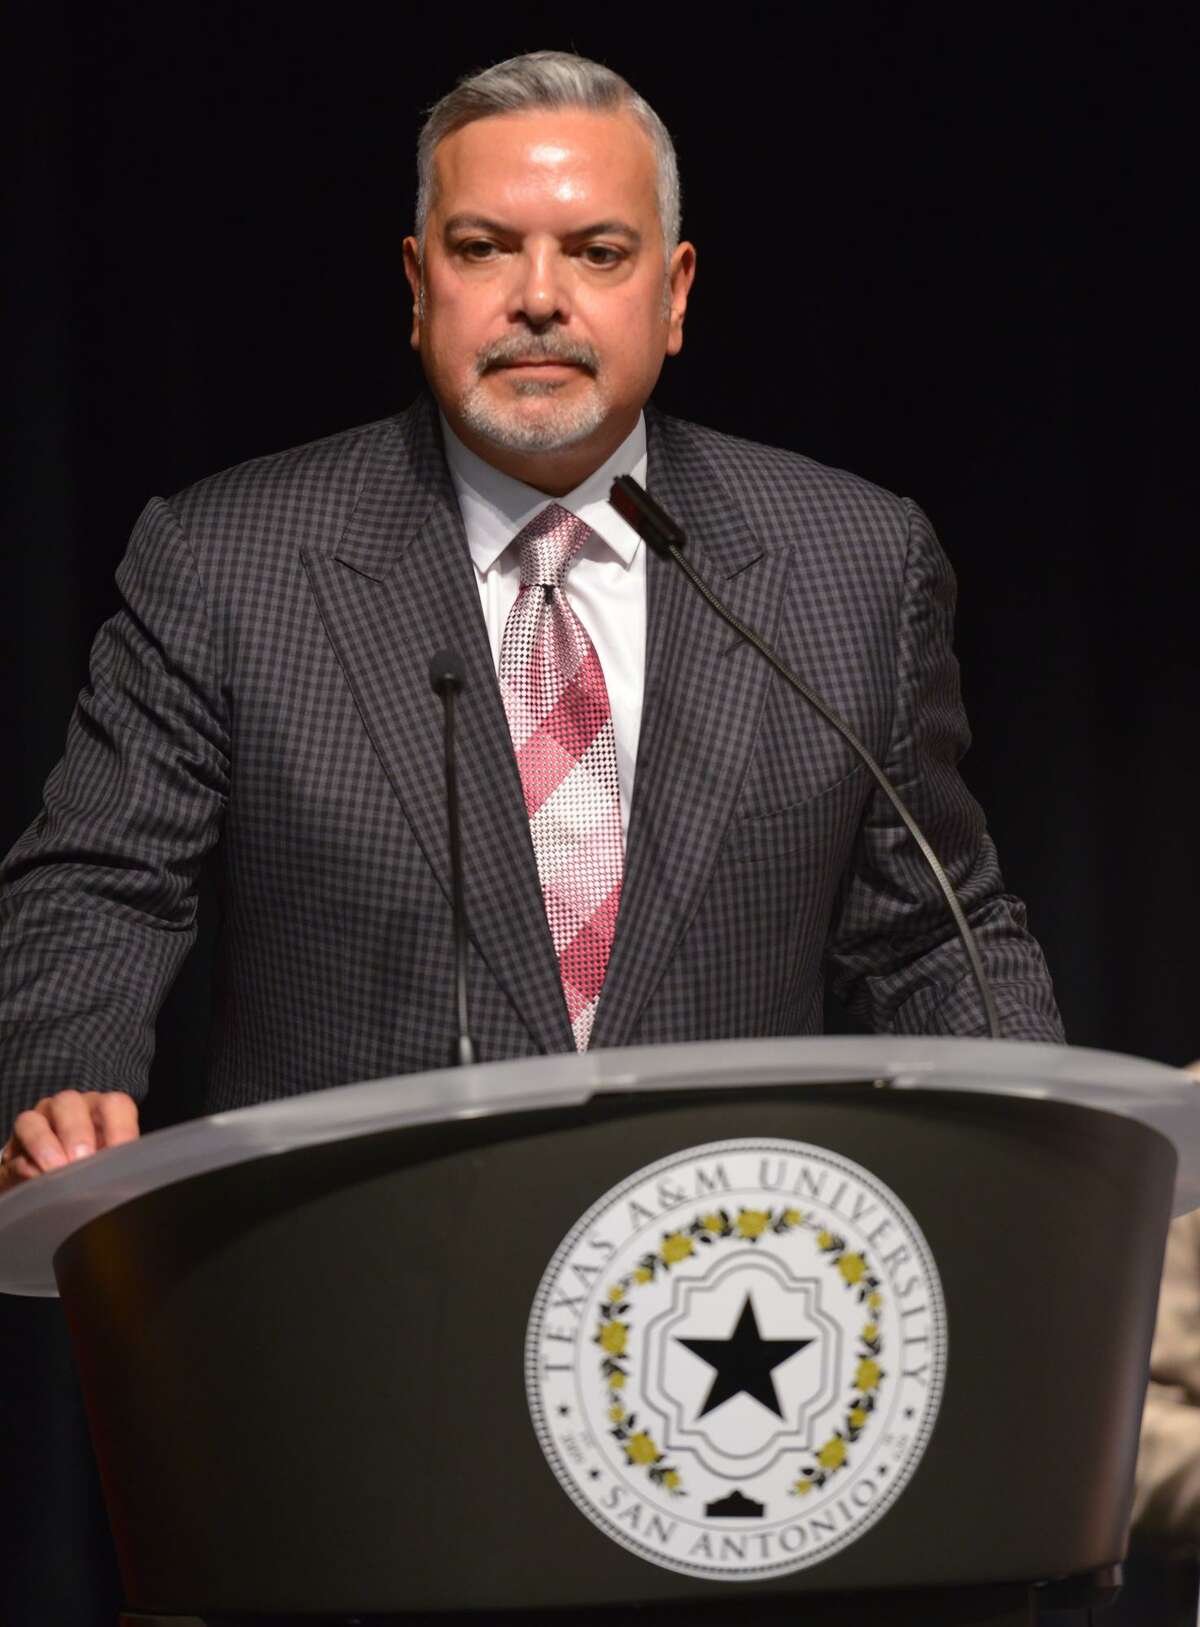 Henry Munoz, Chairman of the Board and CCO, Munoz & Company, speaks during the debut ceremonies for the new Central Academc Building at Texas A&M San Antonio Wednesday morning.